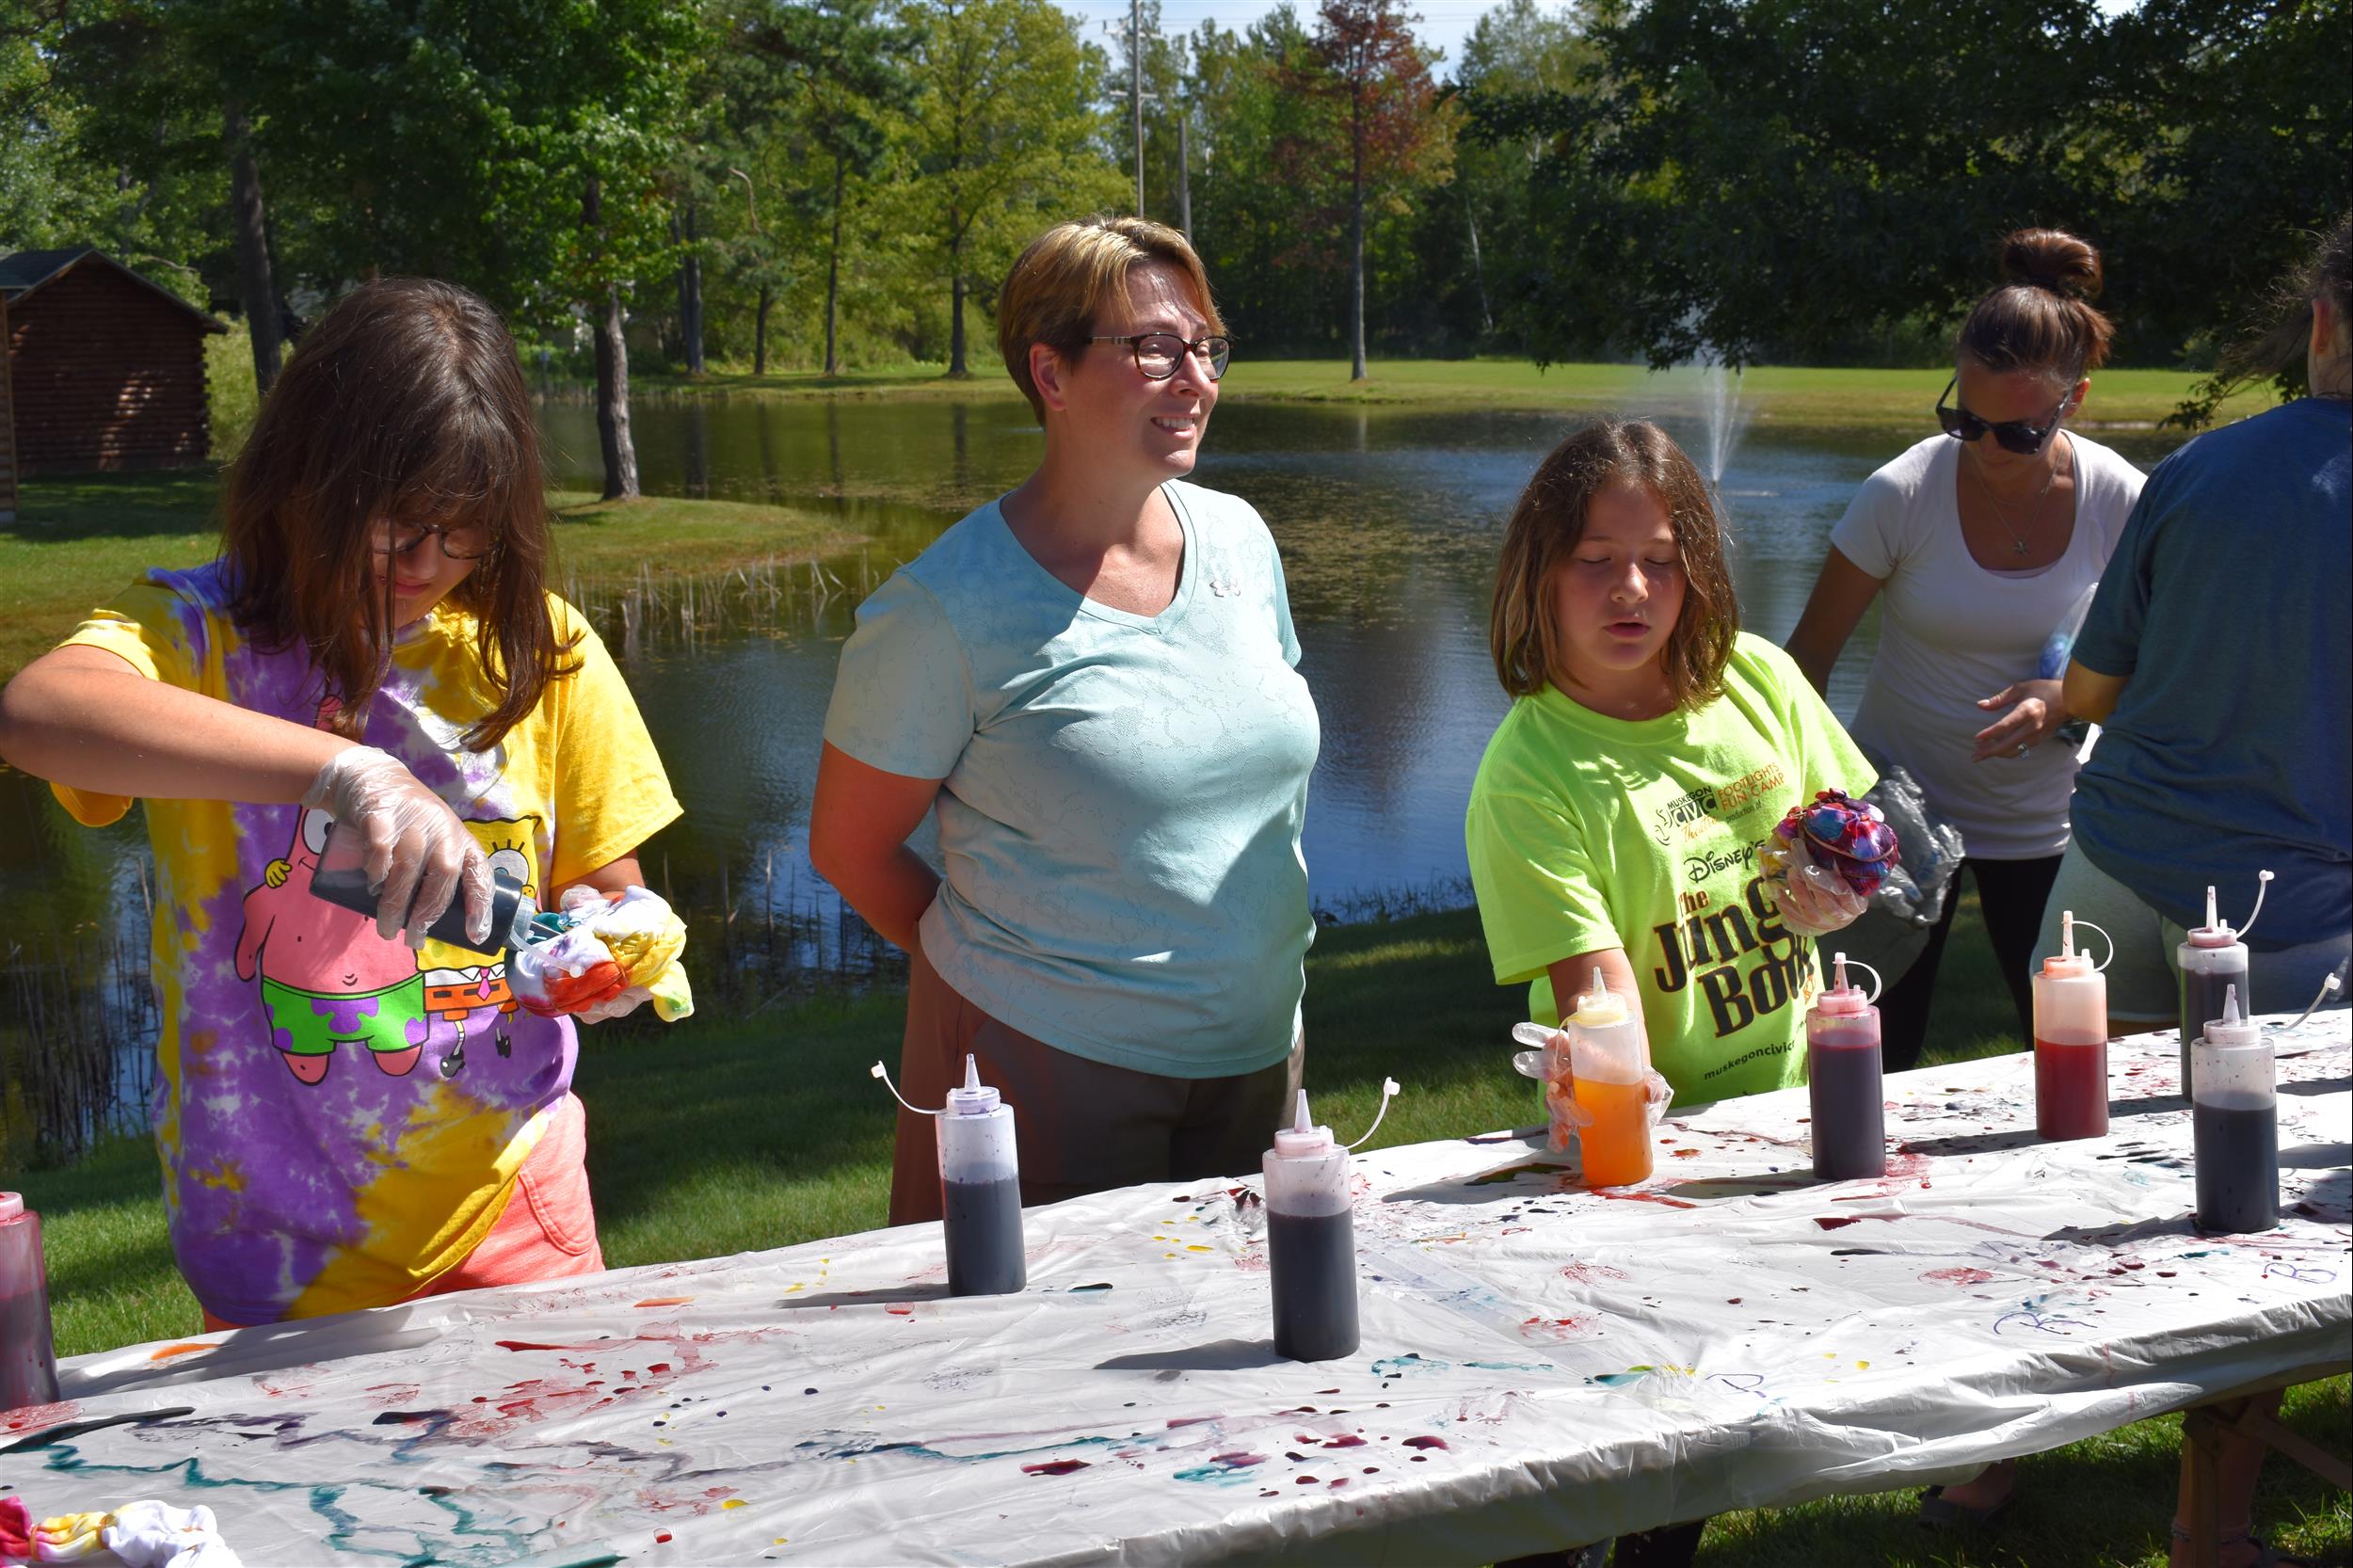 Park guest making tie-dye shirts outside by pond